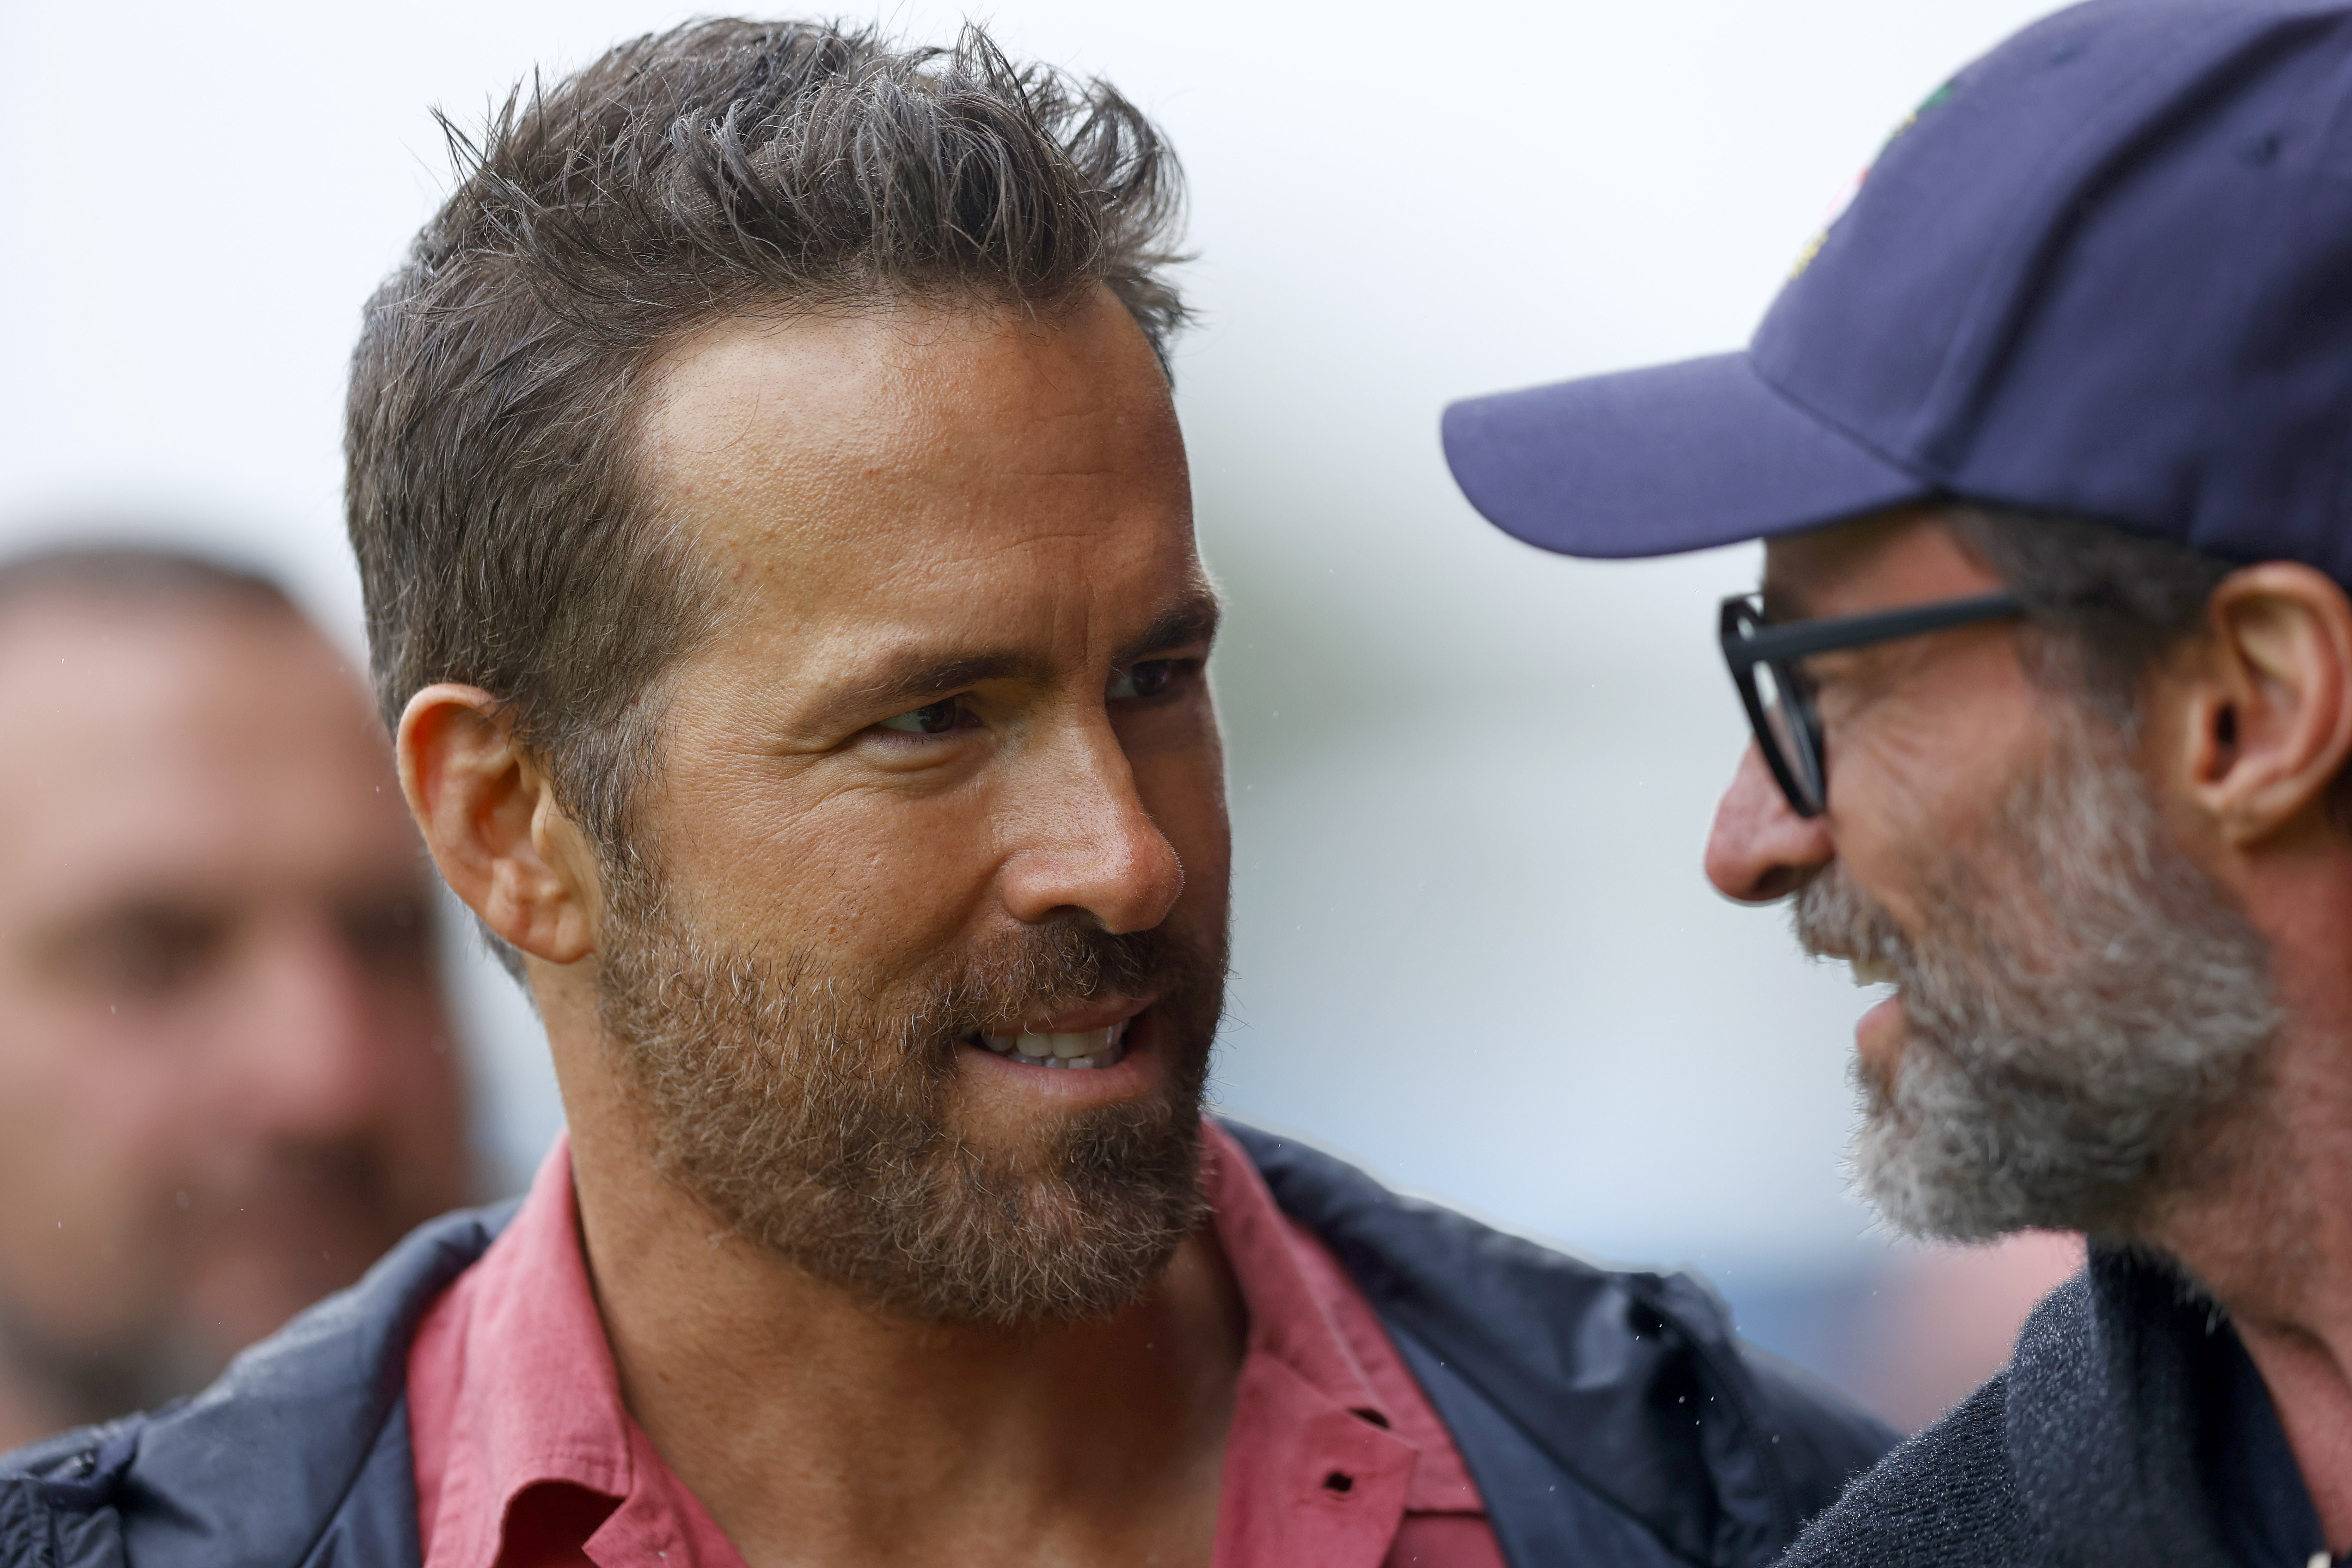 Ryan Reynolds and Hugh Jackman at the Sky Bet League Two match between Wrexham and Milton Keynes Dons in Wrexham, Wales on August 5, 2023 | Source: Getty Images